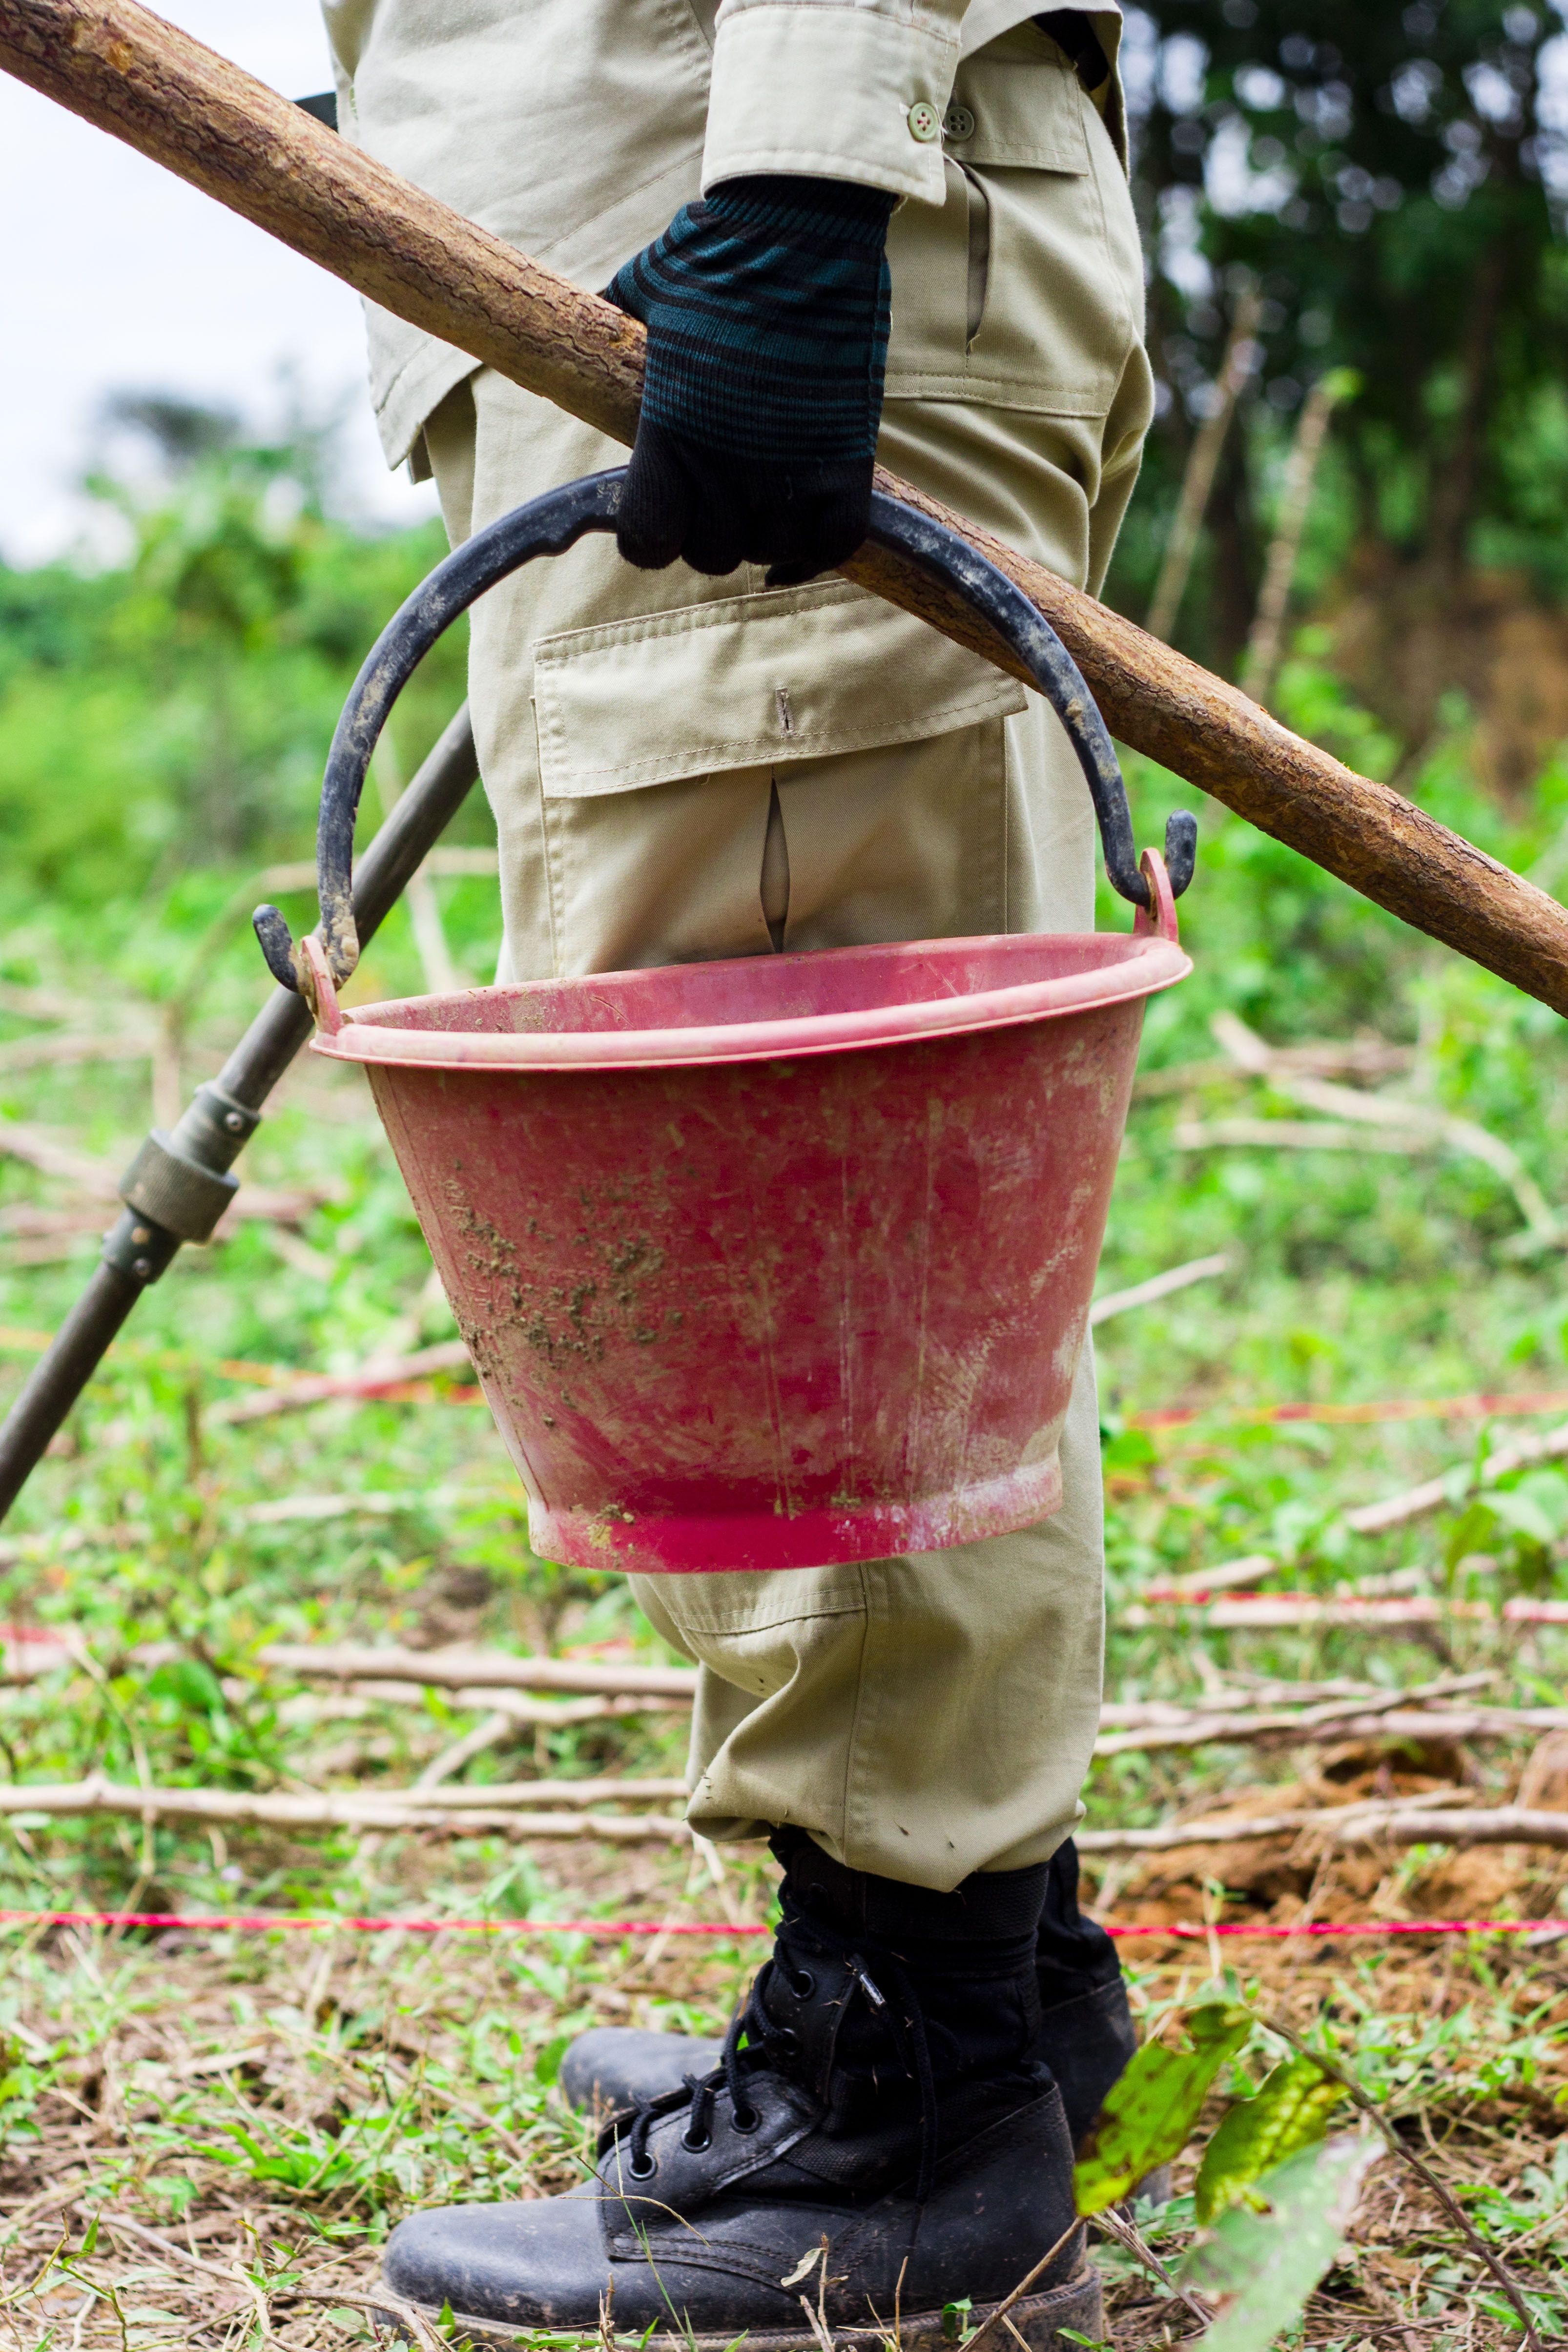 Phetsamay stands with the three instruments every UXO clearer is given: a bucket for scrap metal, a shovel for digging, and a metal detector. Image by Erin McGoff. Laos, 2017. 